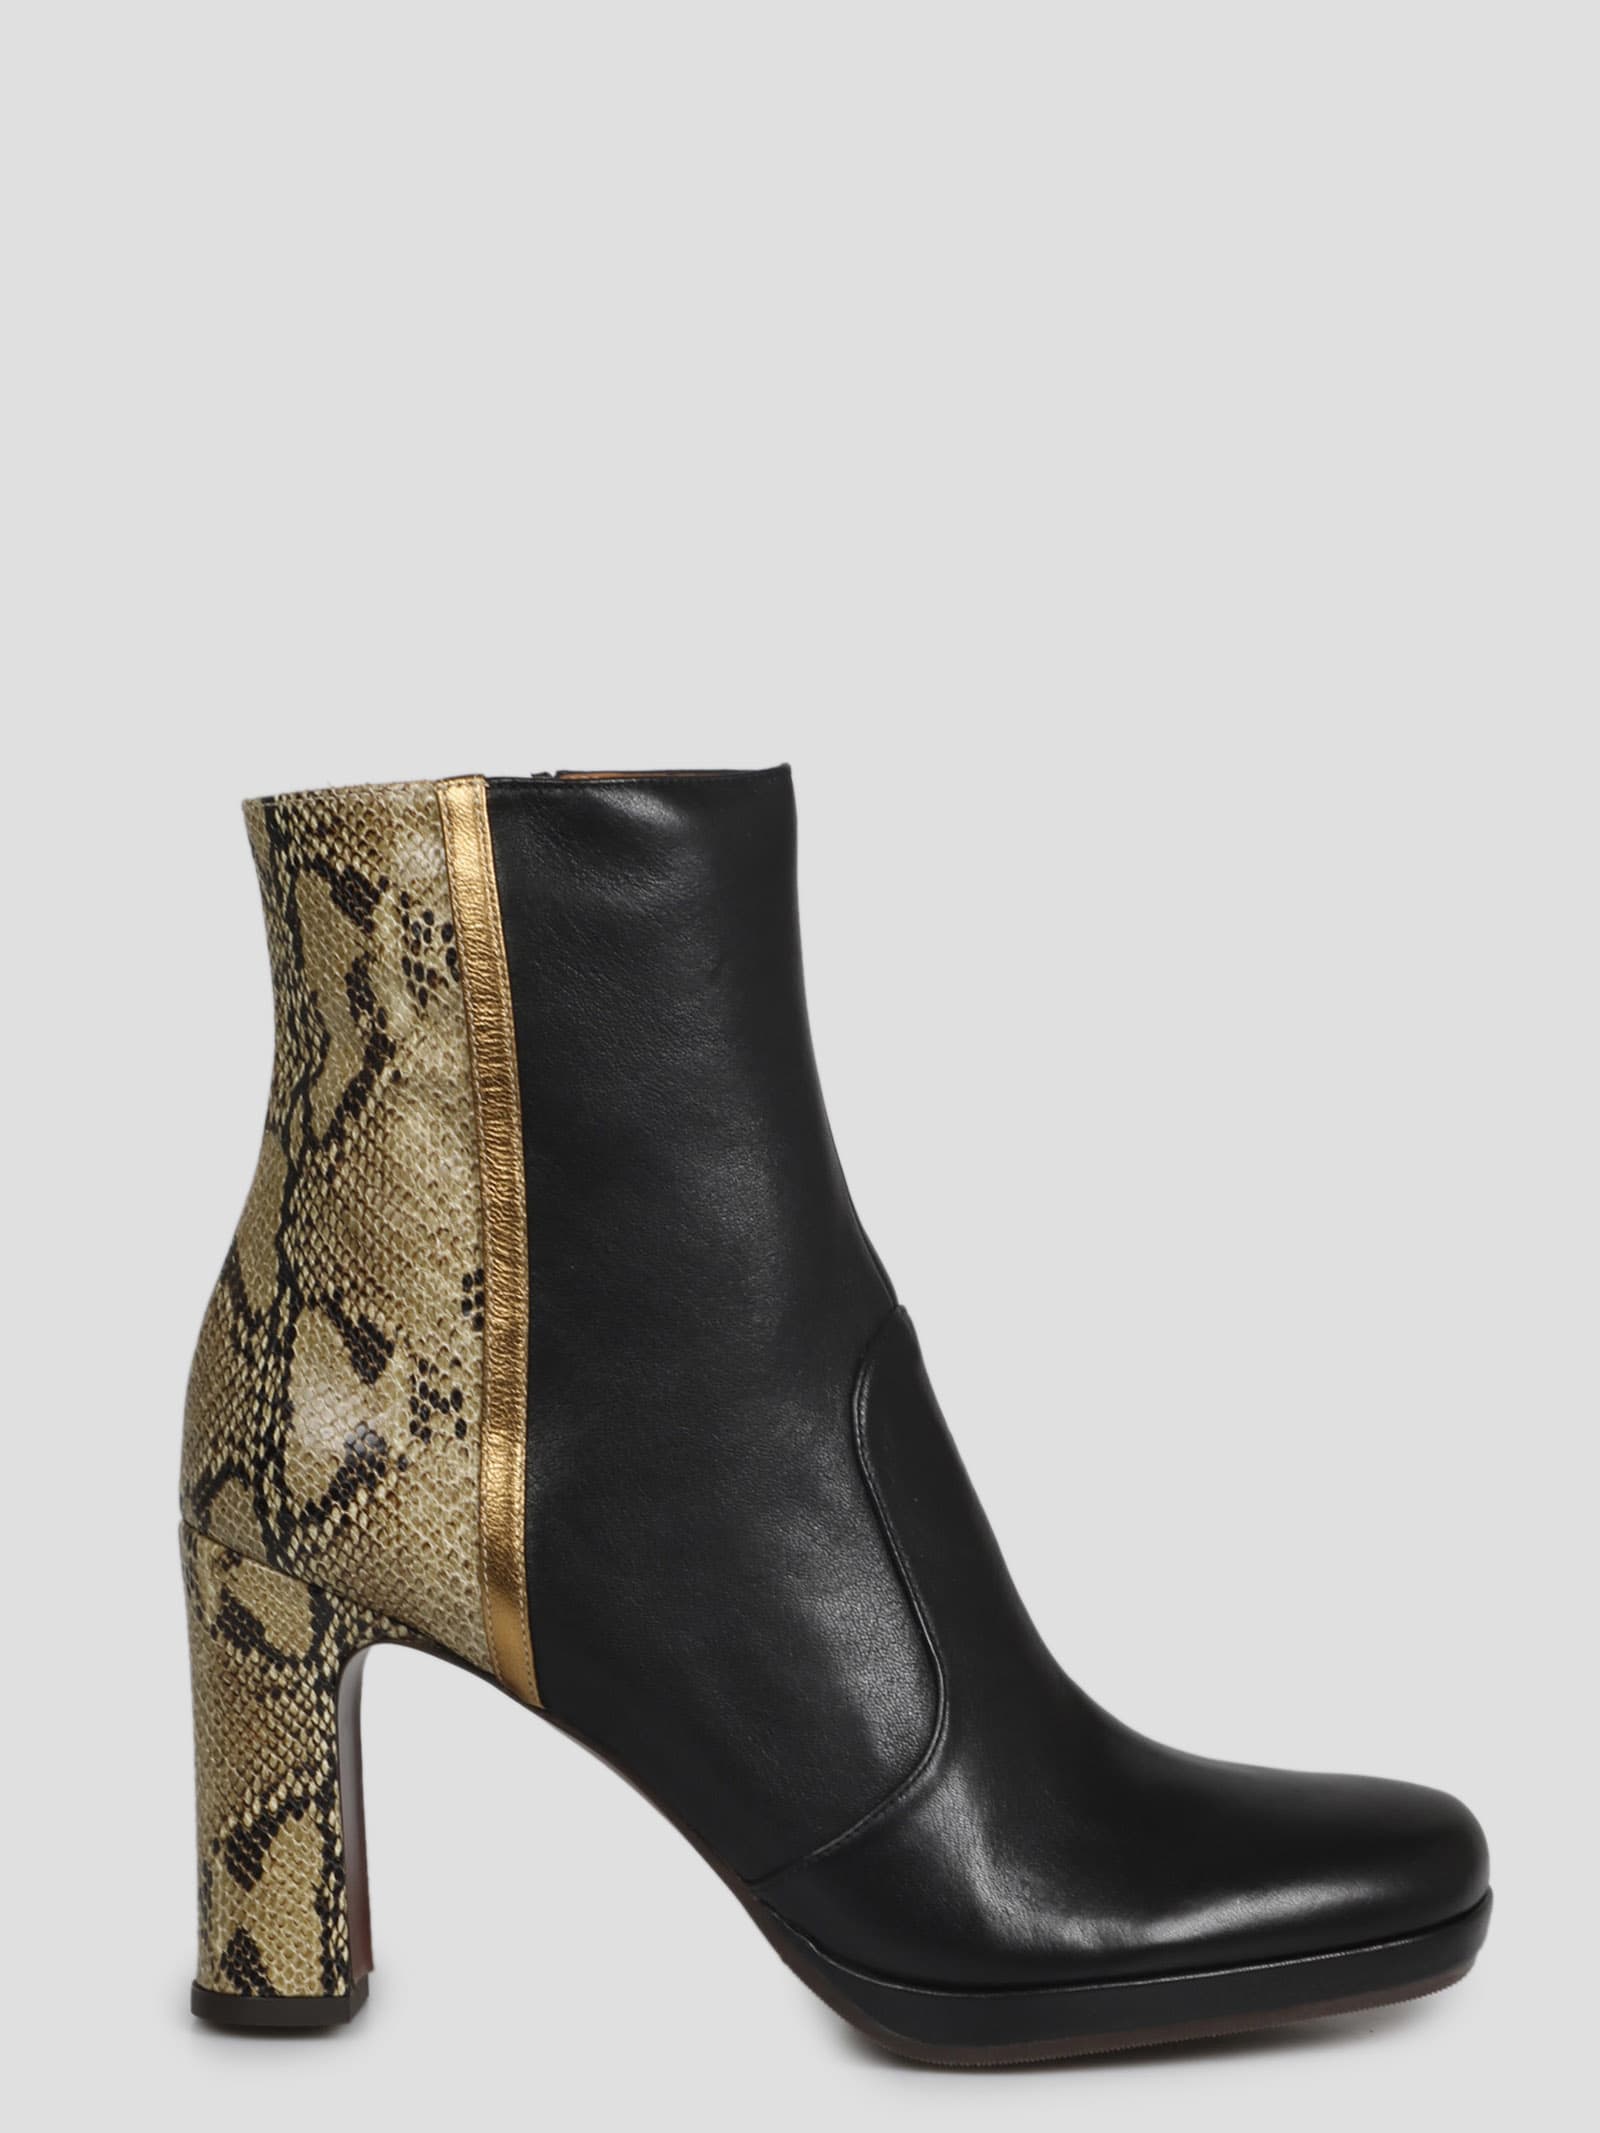 CHIE MIHARA UKEDA ANKLE BOOTS